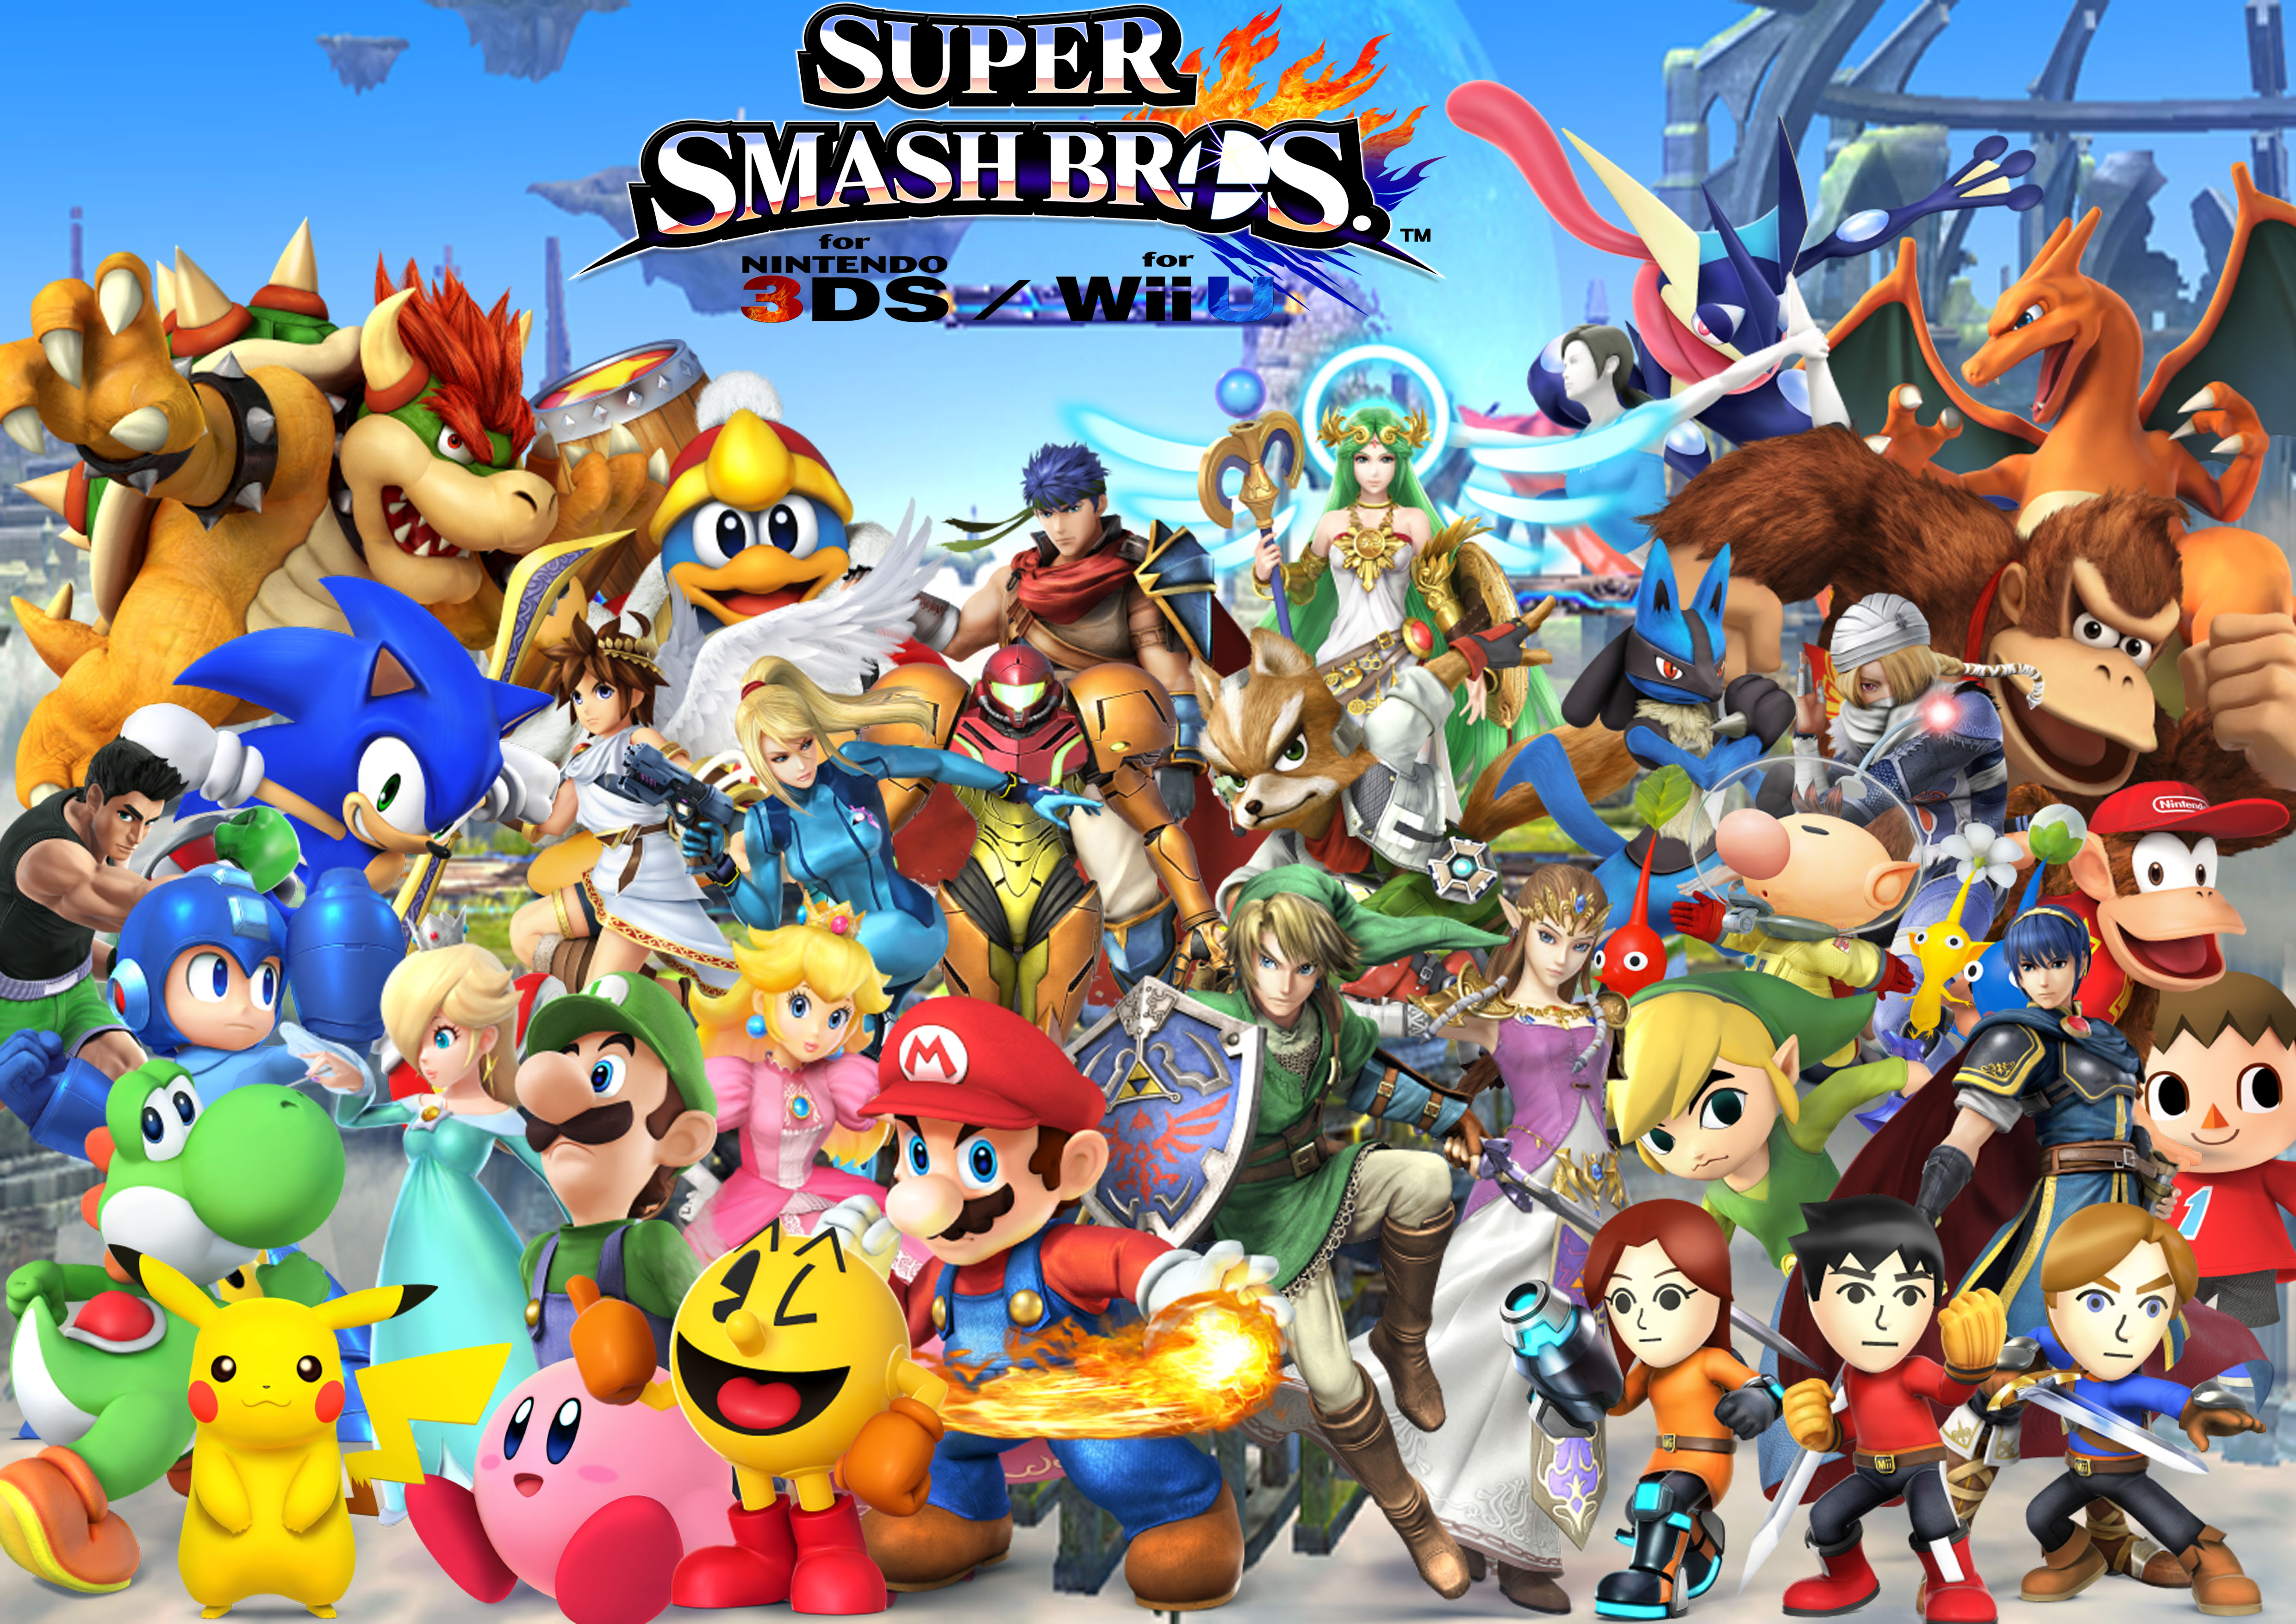 Video Game Super Smash Bros For Nintendo 3DS And Wii U 4961x3508